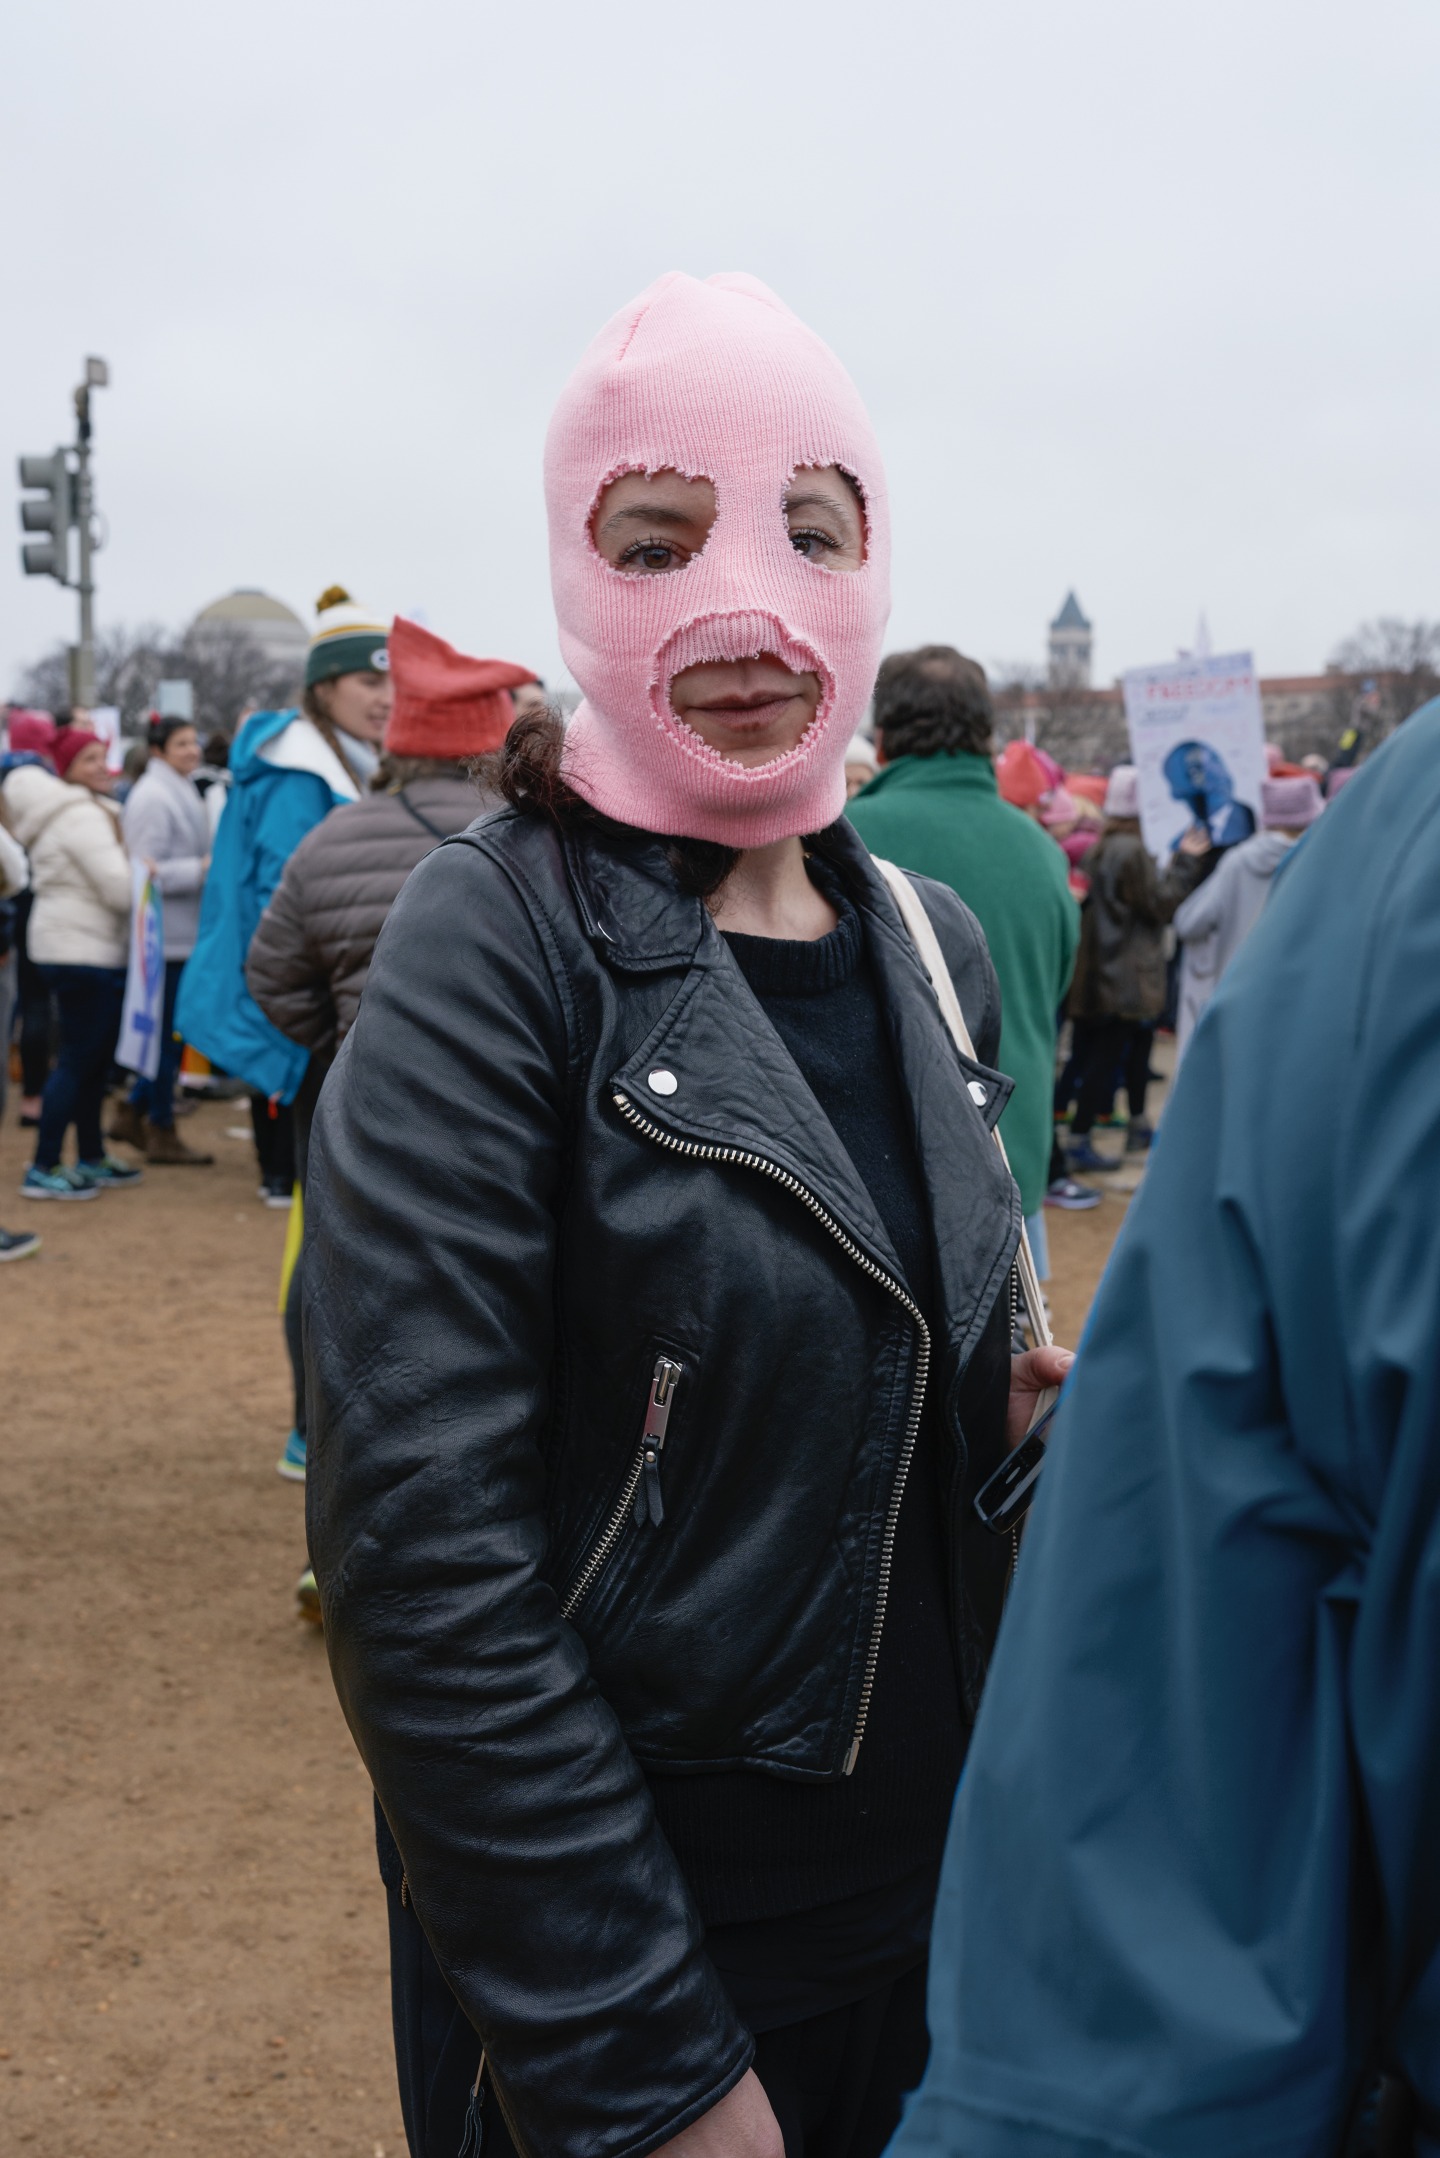 The Faces Of Resistance At Washington D.C.’s Women’s March